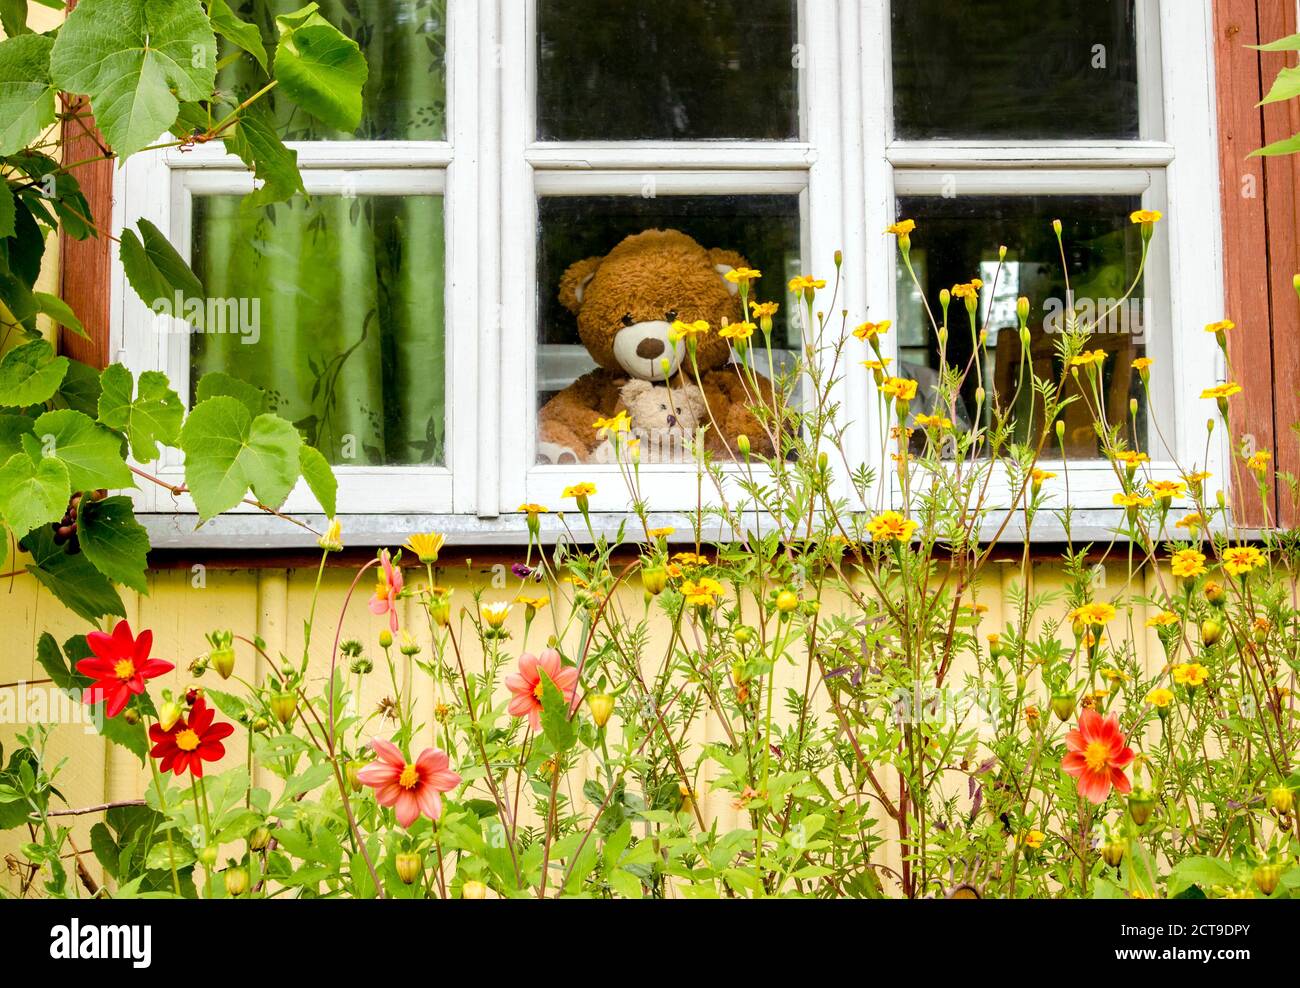 Going on a bear hunt concept. Large stuffed toy teddy bear with small one sit on window and looking outside, flower bed by window. Photographed from o Stock Photo